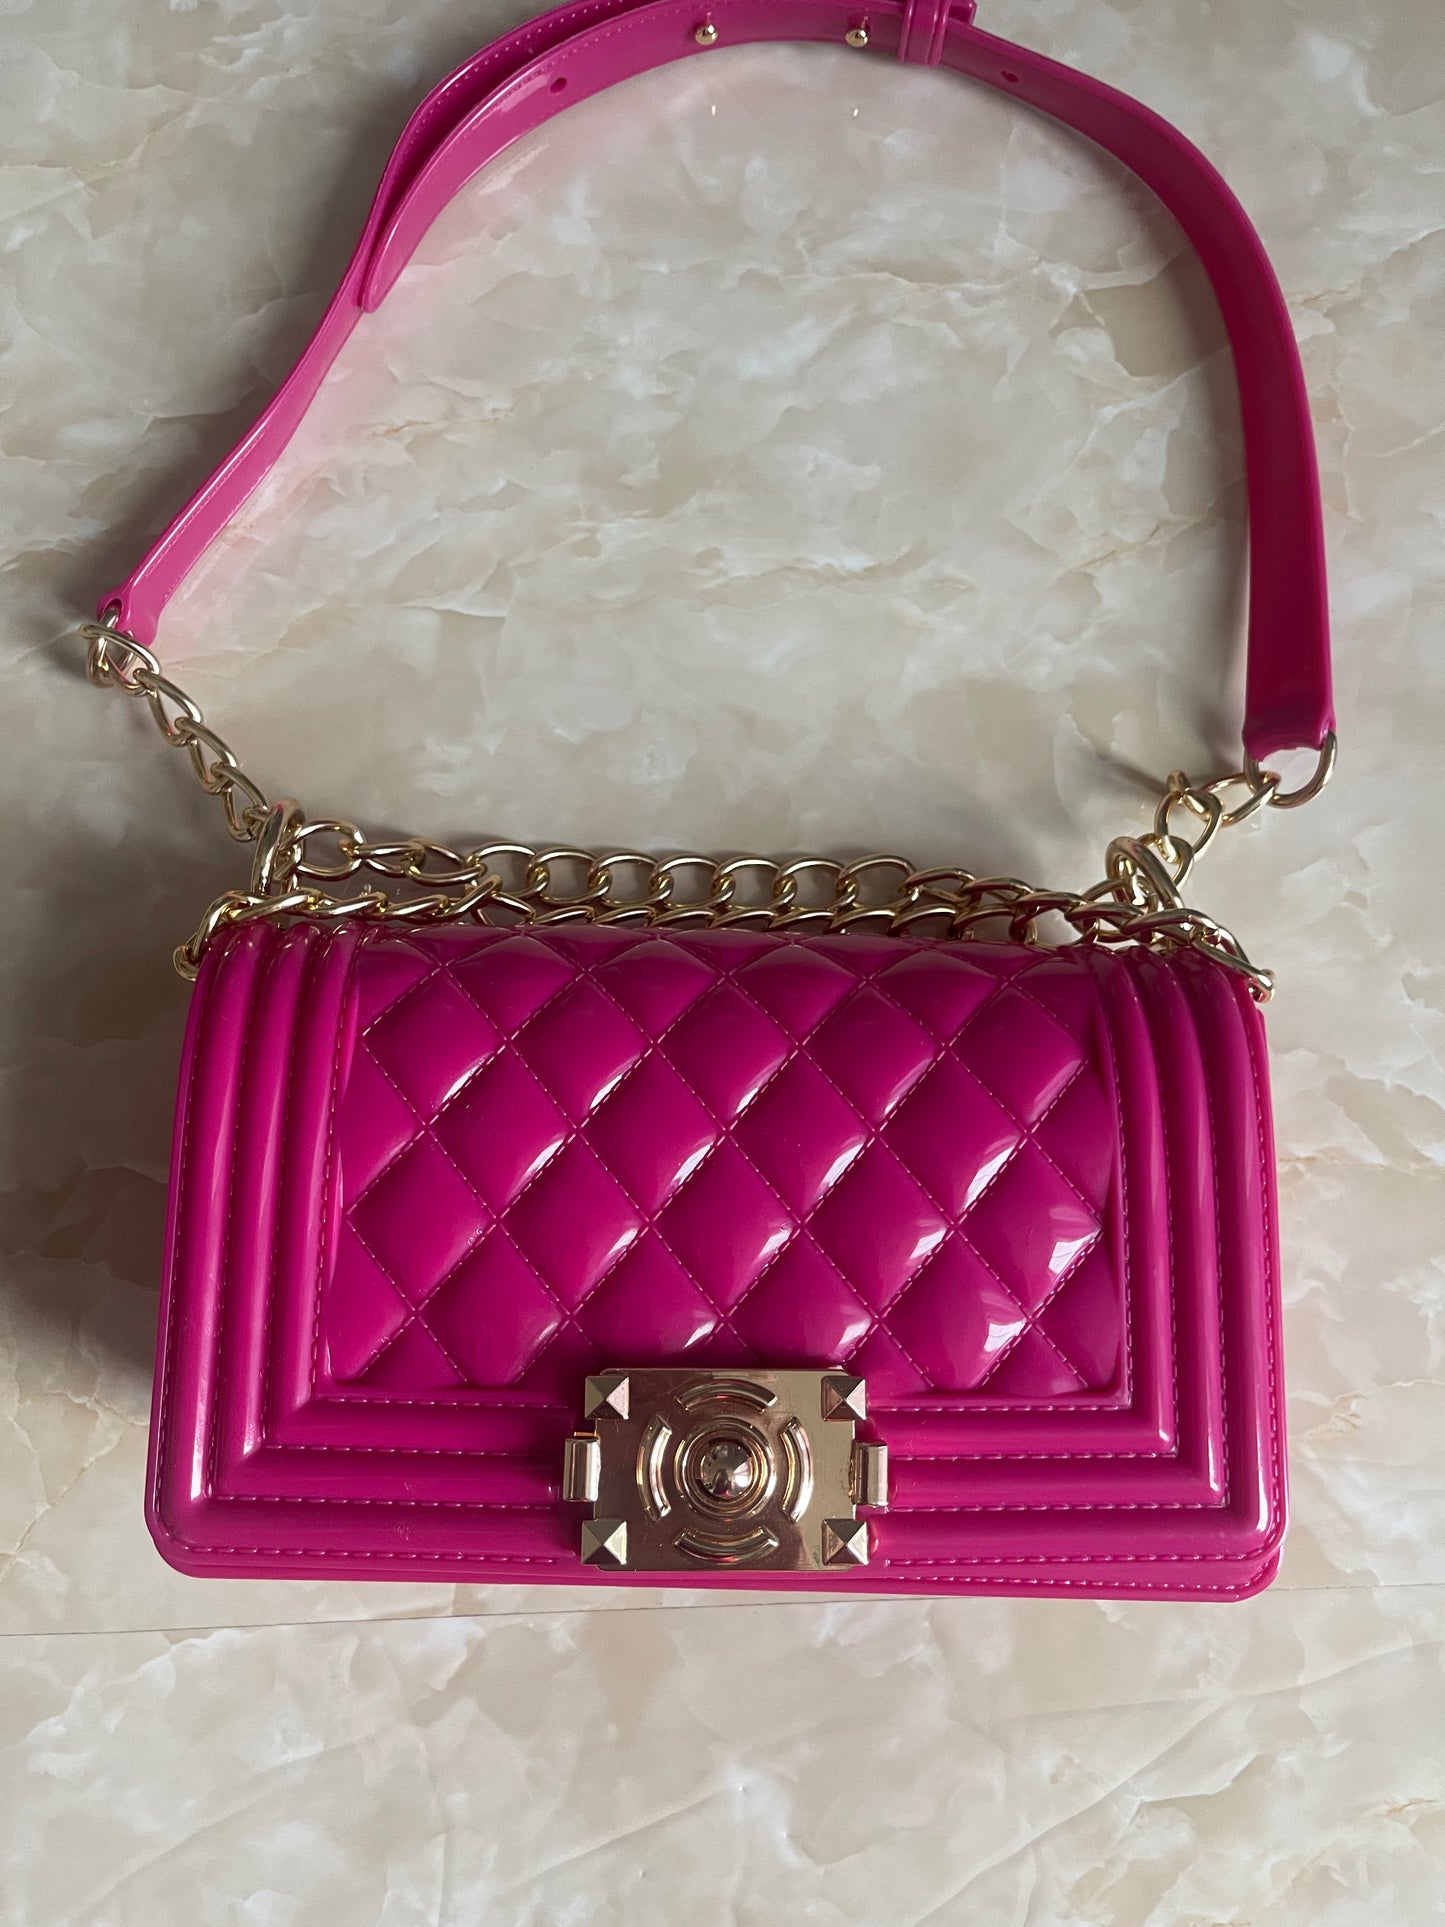 Pink jelly bag